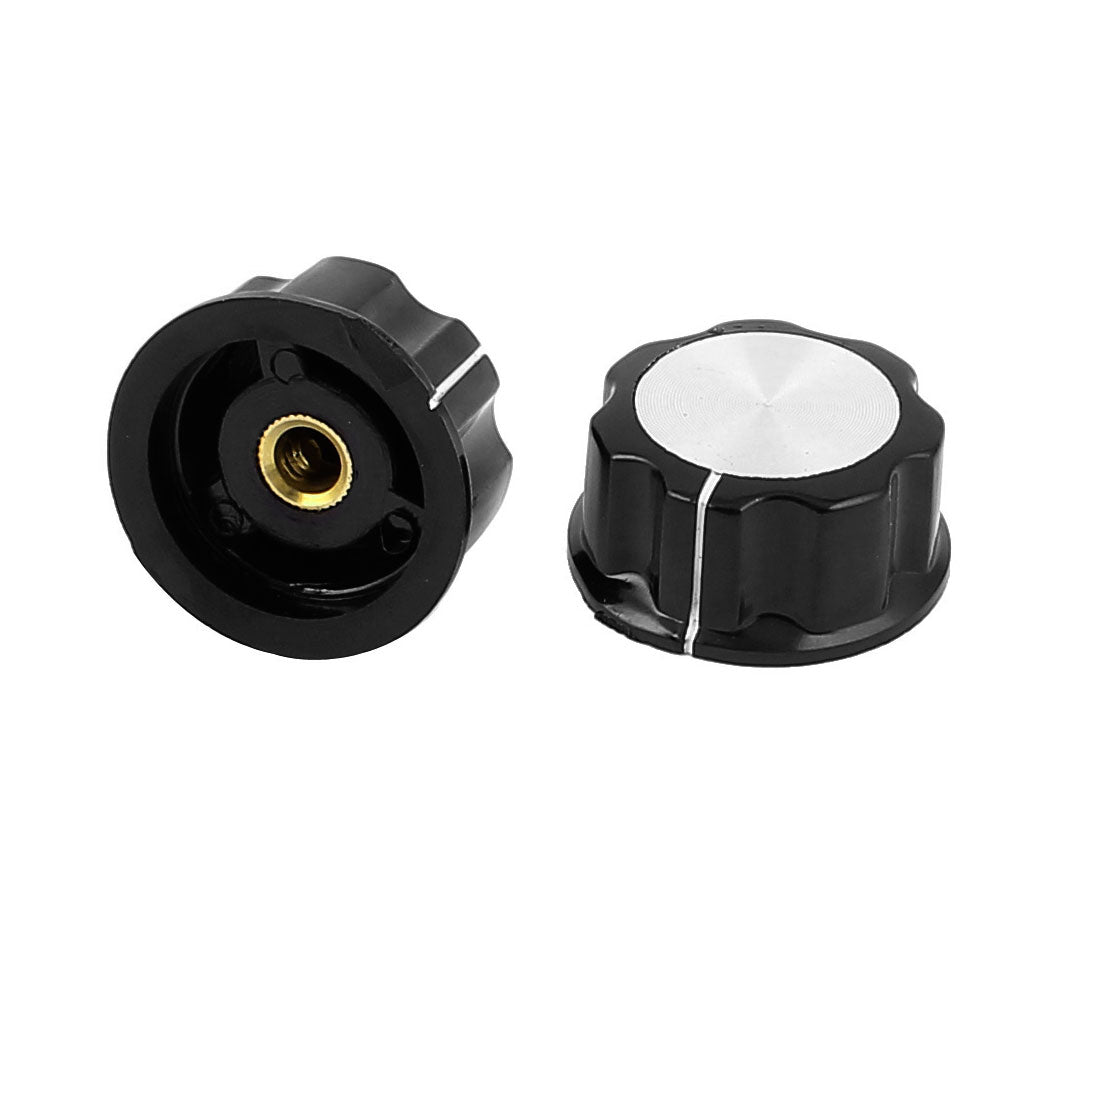 uxcell Uxcell 2 Pcs Black Plastic Light Lamp Dimmer Switch Control Potentiometer Rotary Knob Cap for 6mm Shaft